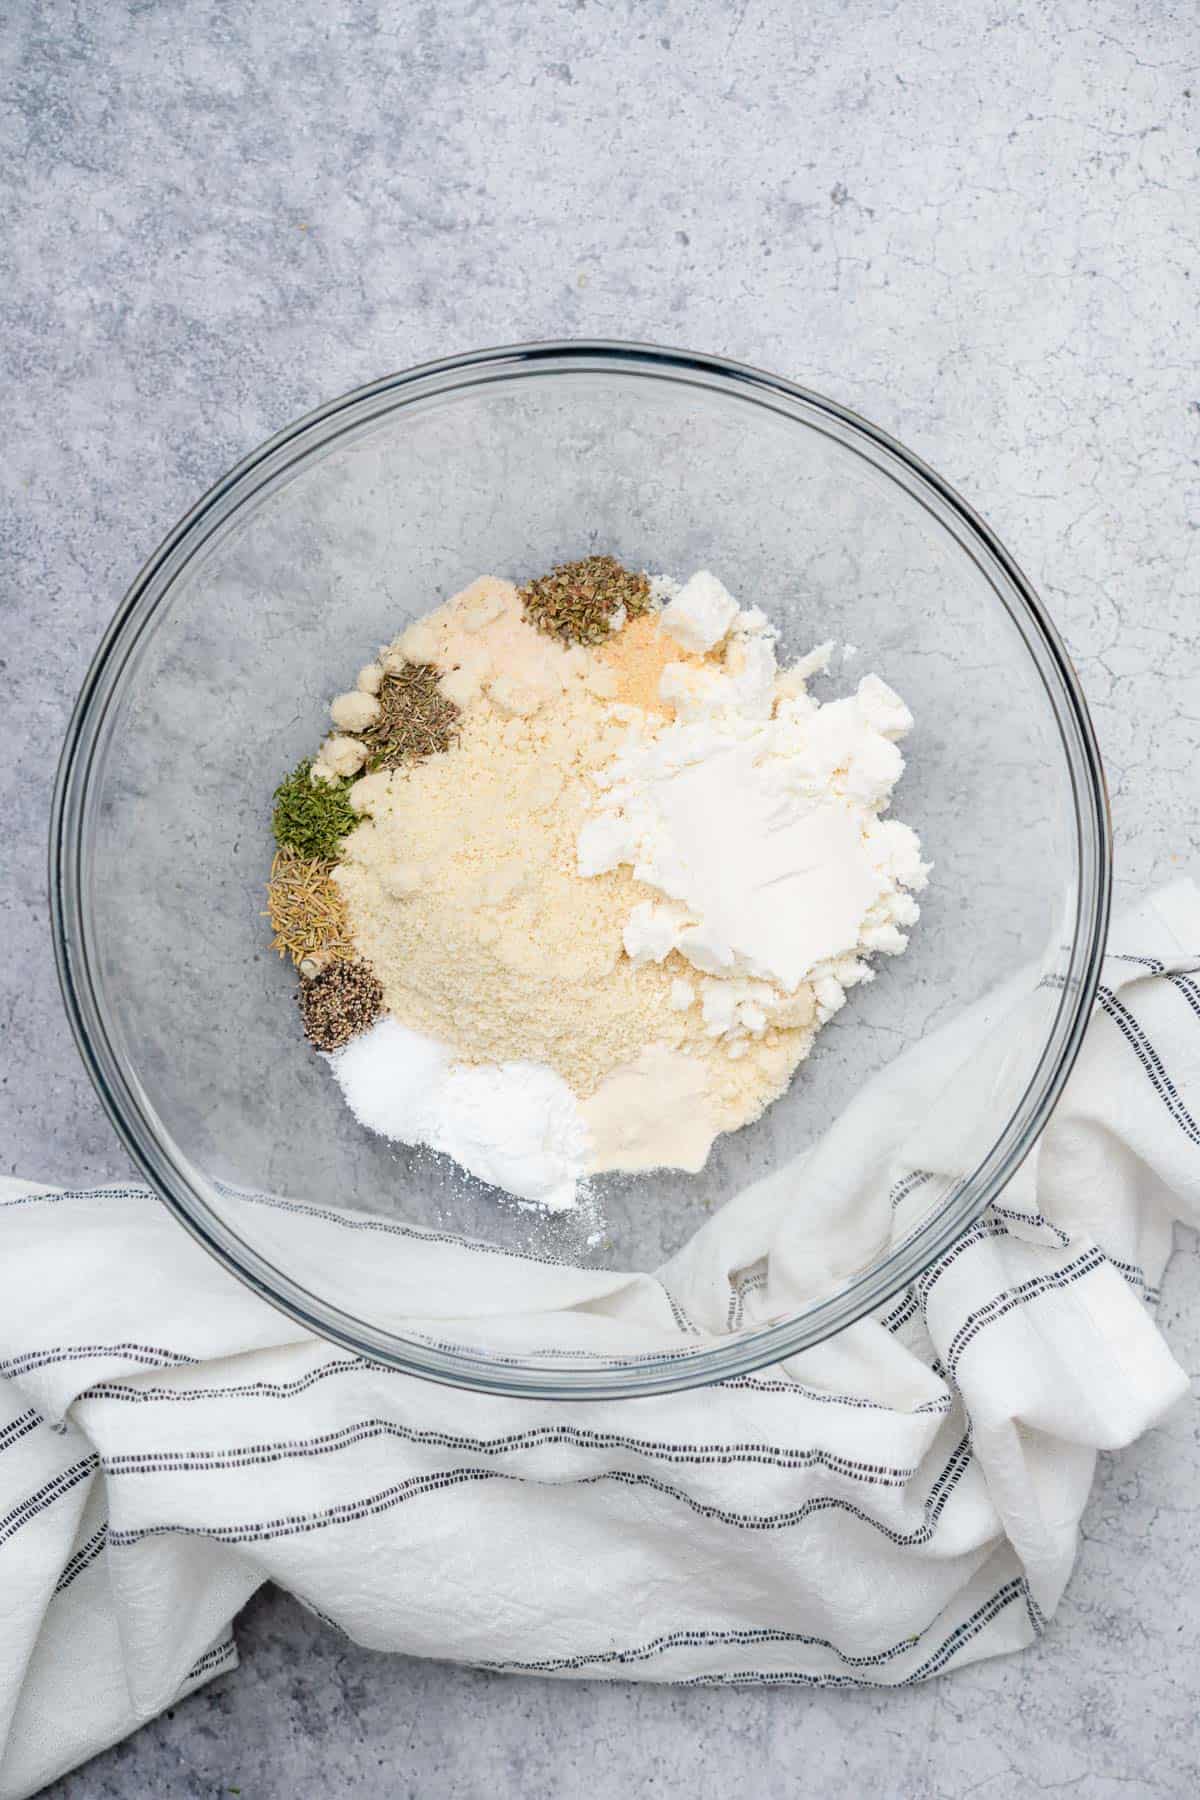 almond flour with whey protein salt and seasonings for keto dumplings